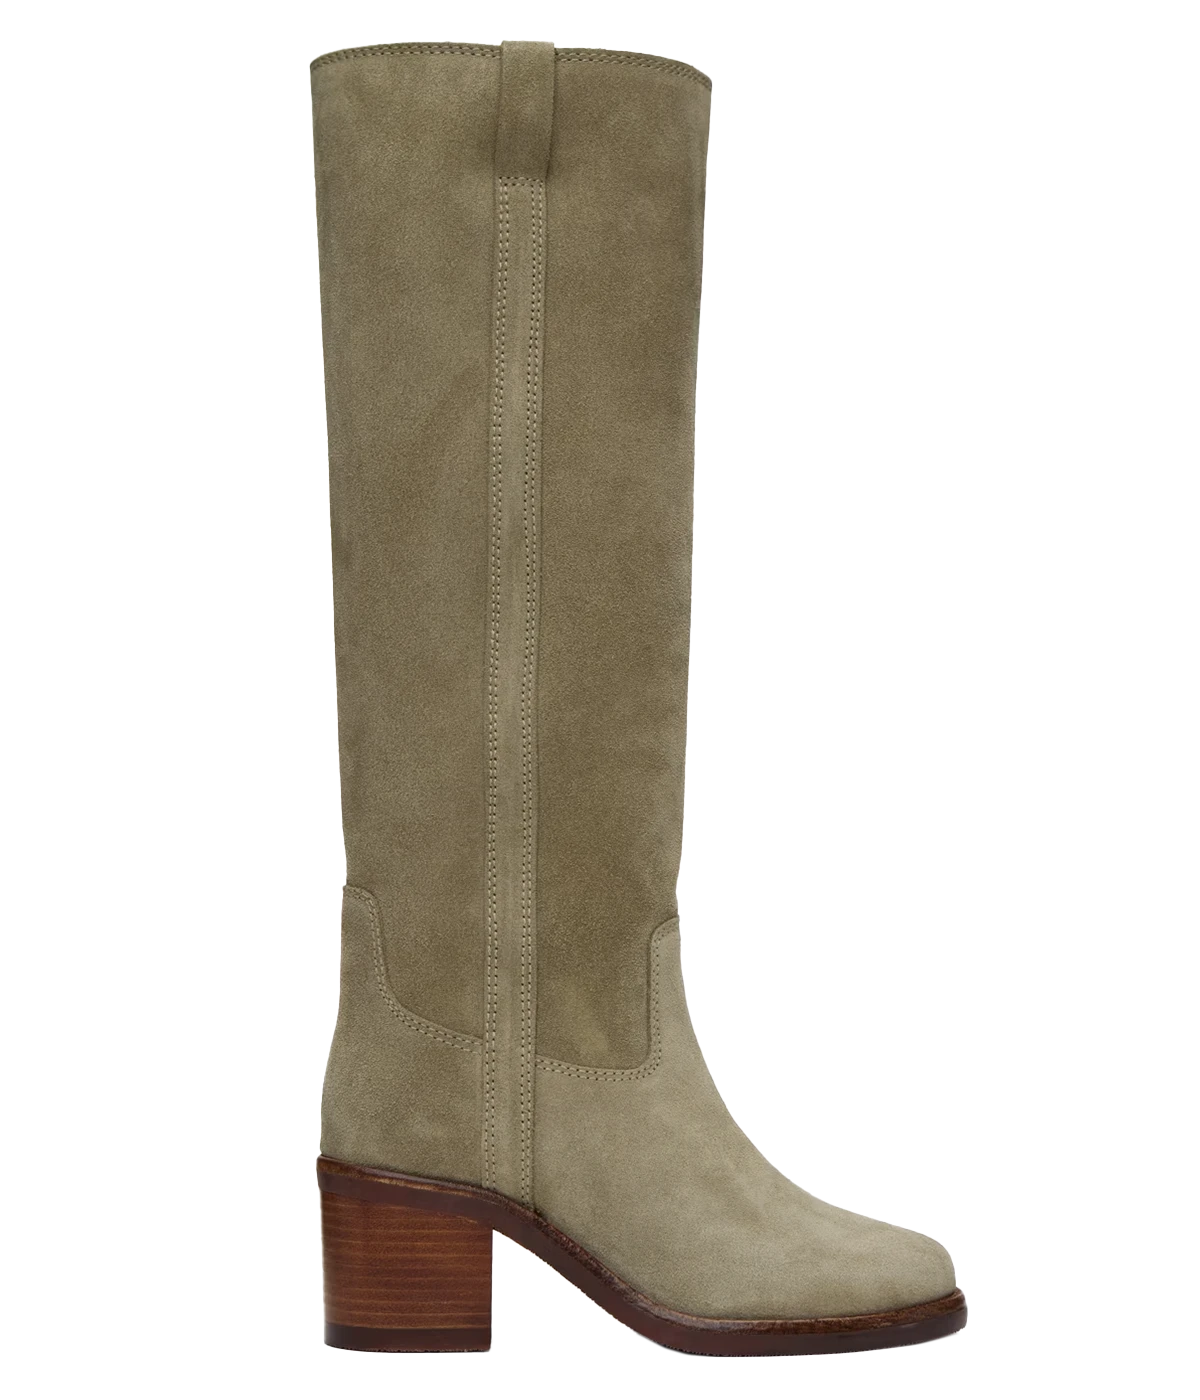 Knee length beige suede round-toe boots by Isabel Marant. A mid-block 80mm heel completes the slip-on design of these calf suede leather shoes. Easy and comfortable to wear year round. 